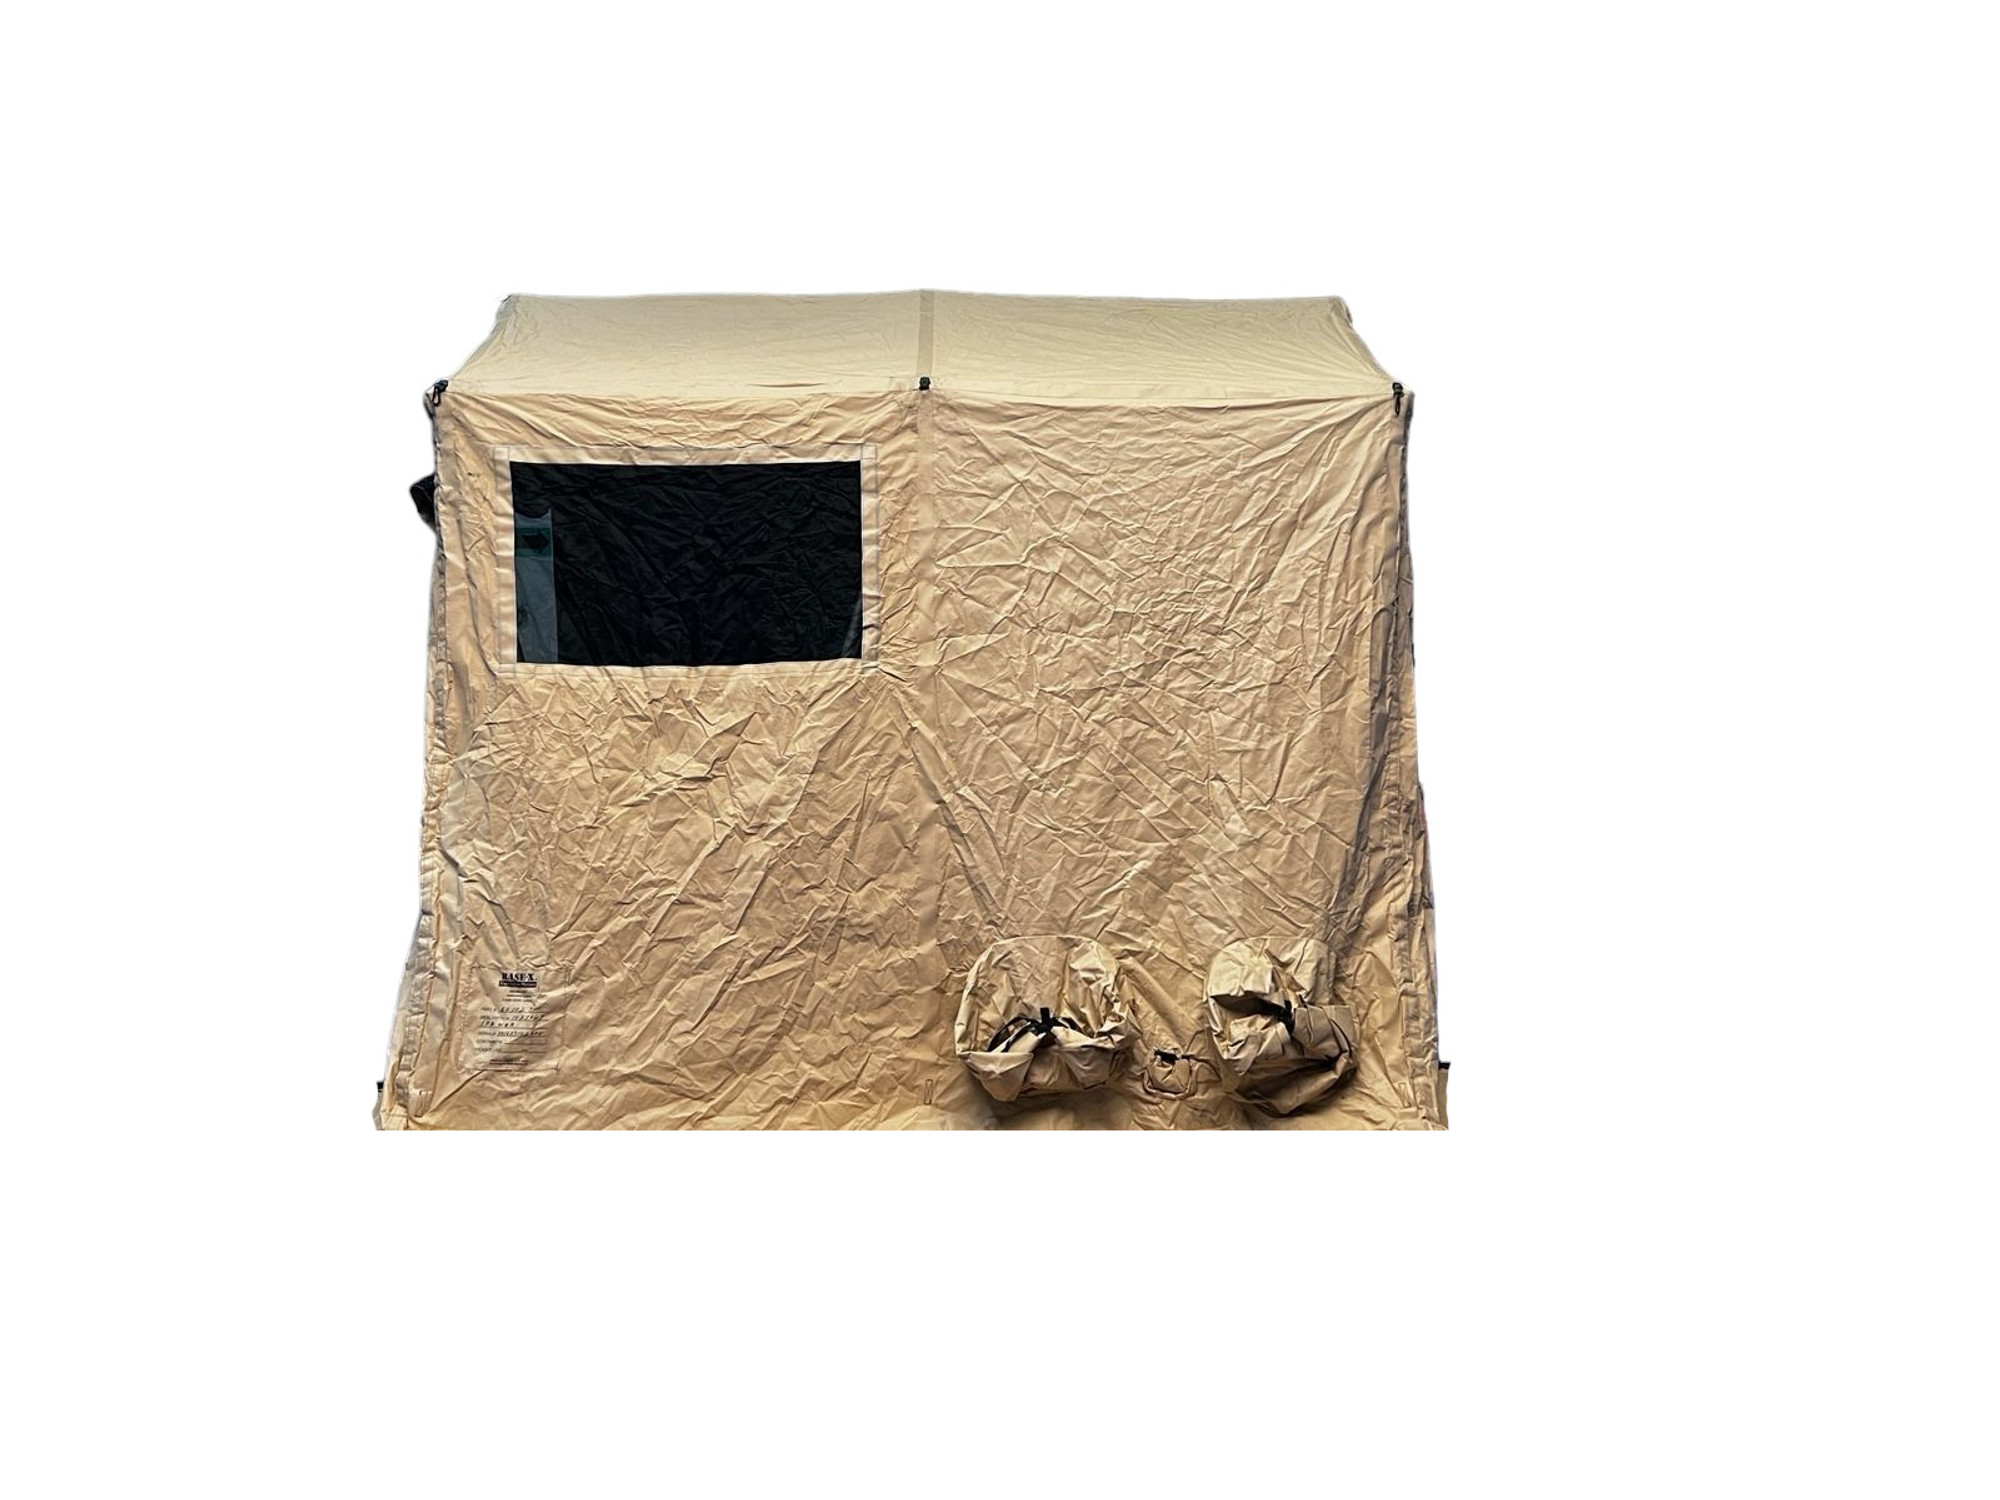 U.S. Armed Forces HDT Global Base X 102 Tan Expedition Tent (Tan)